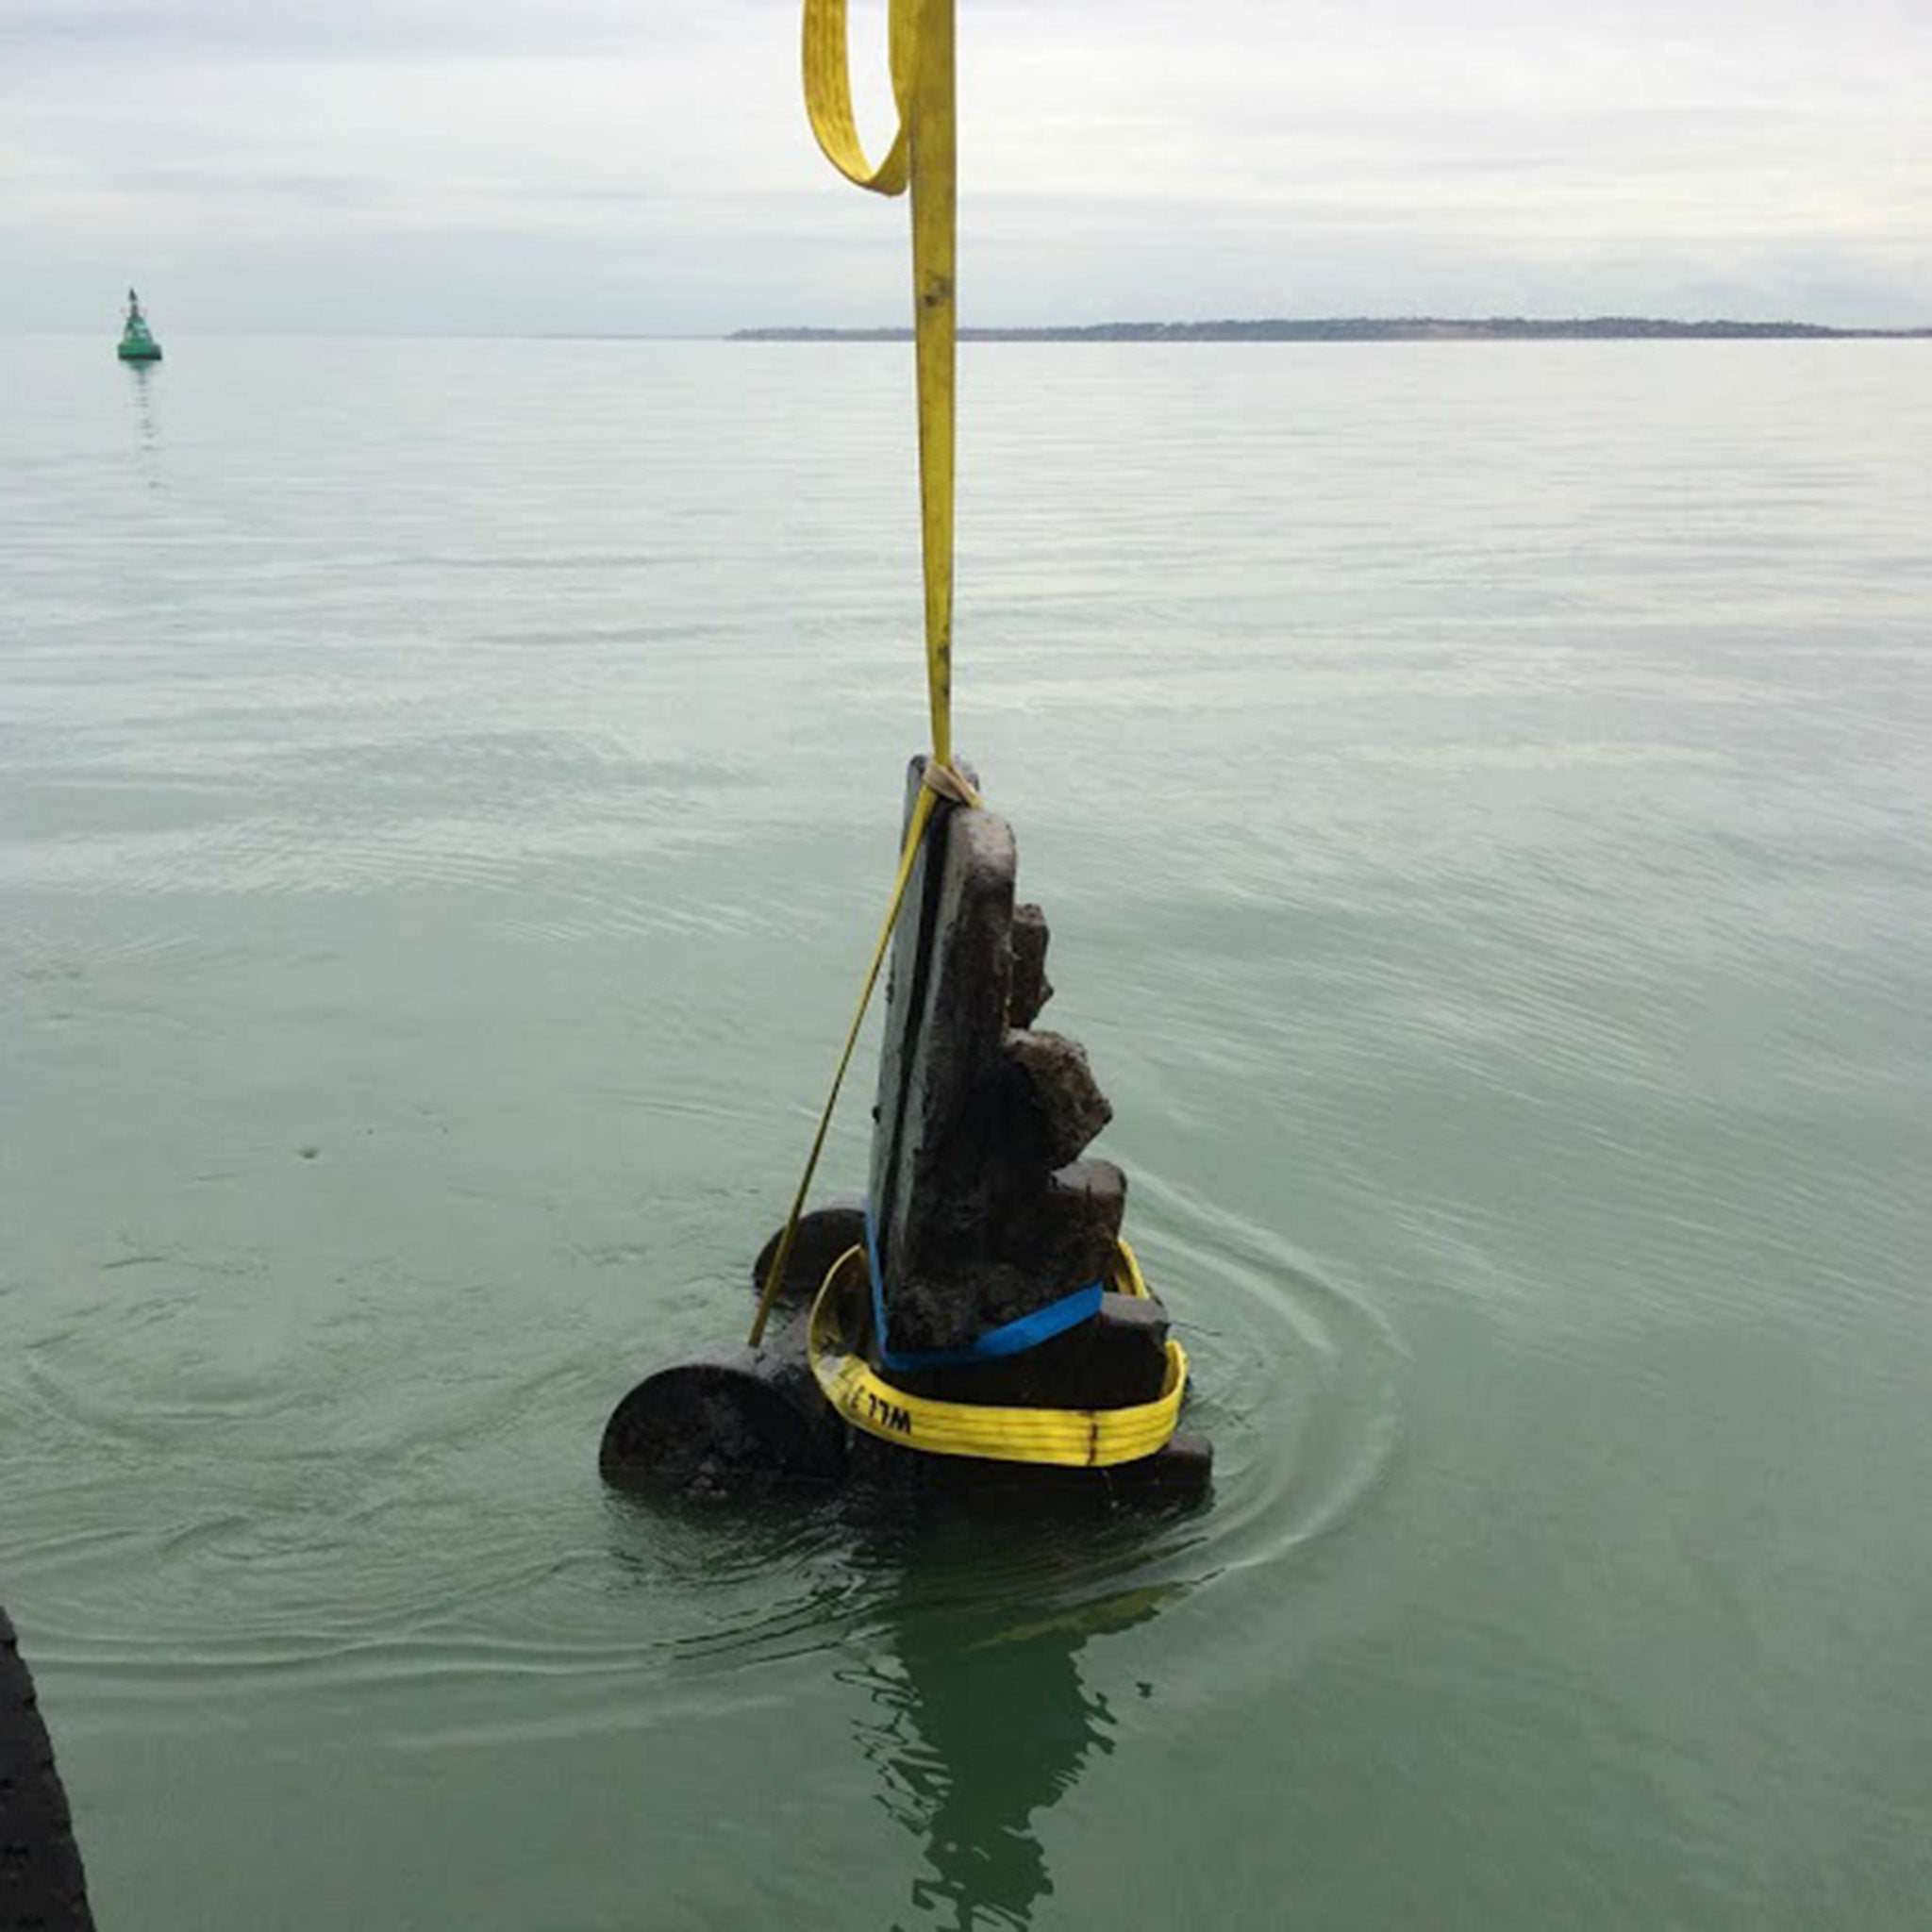 (Photo credit © MSDS Marine/Cotswold Archaeology)